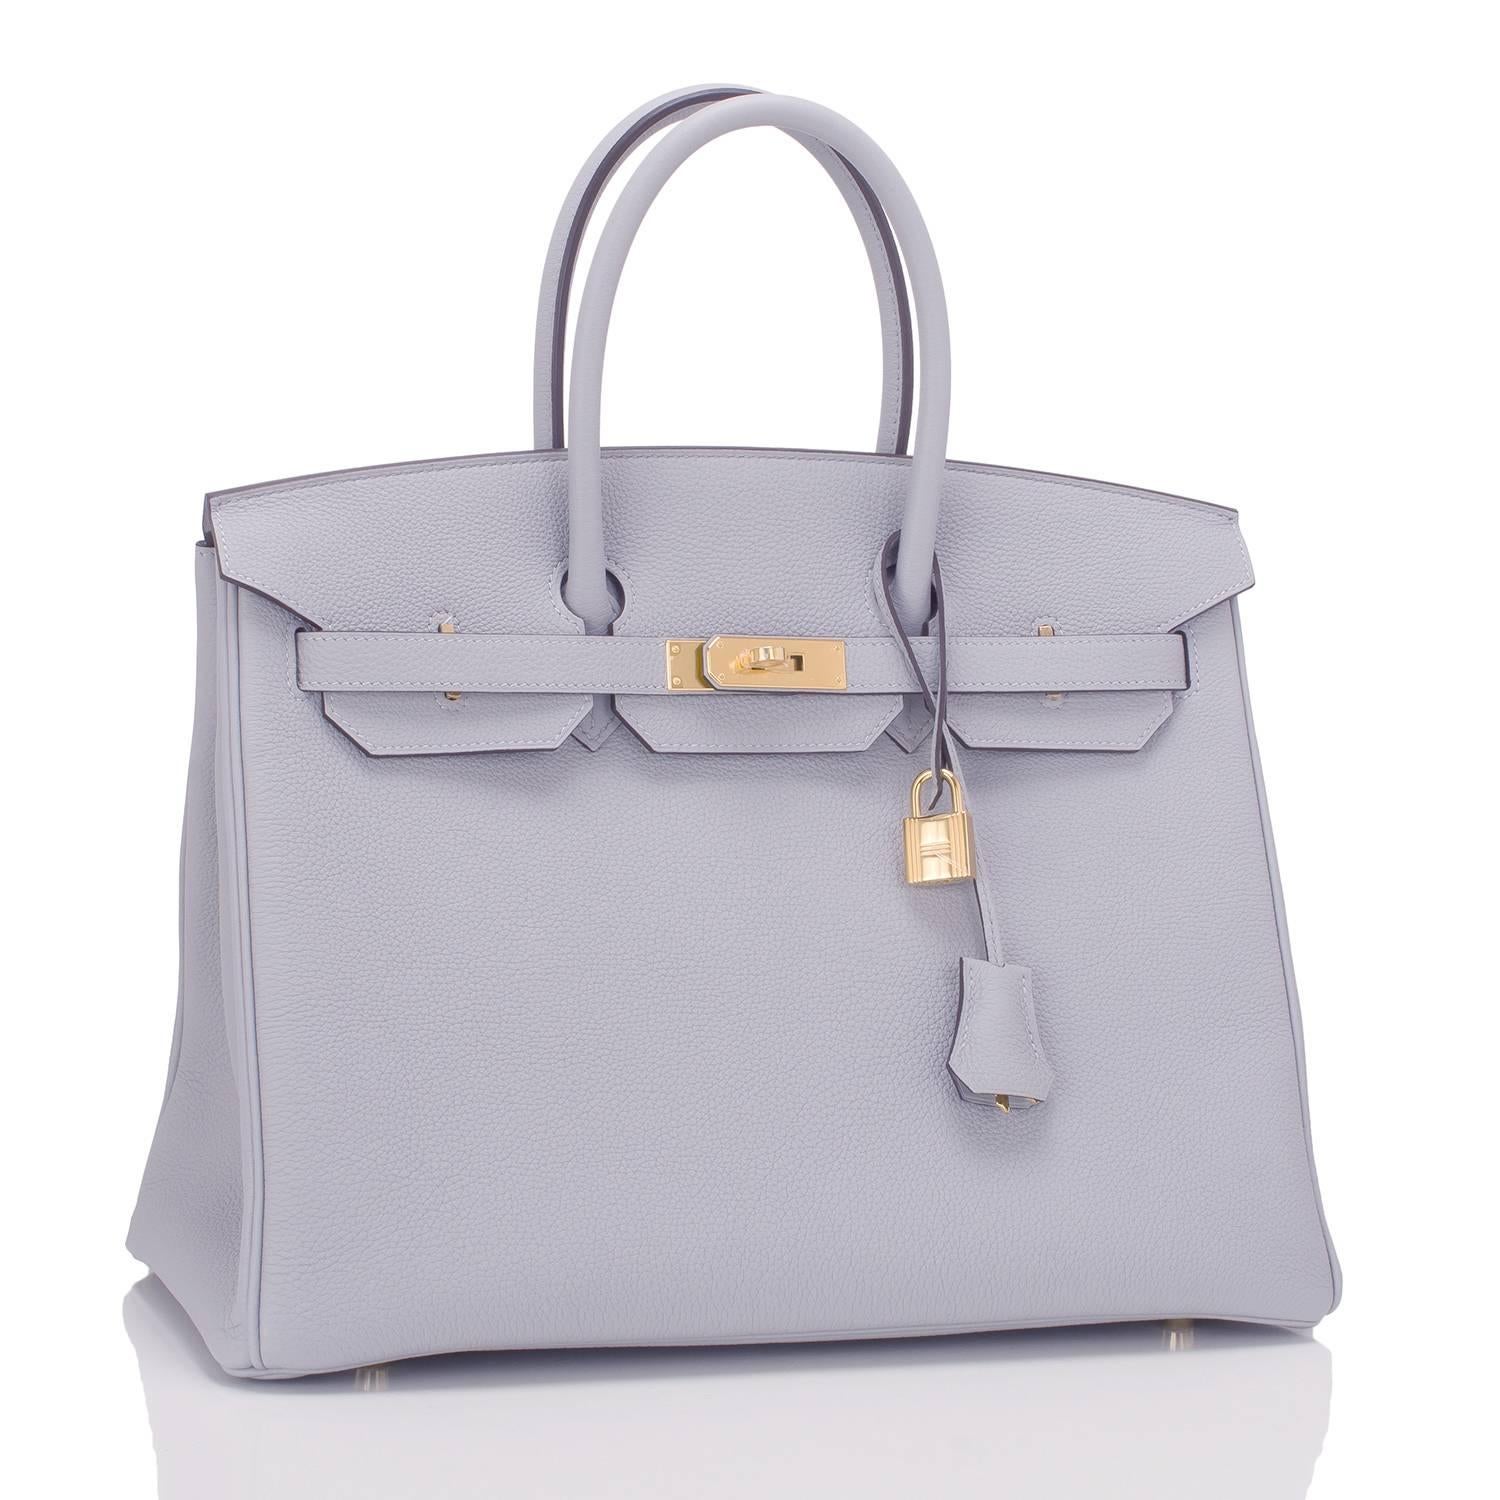 Hermes Blue Glacier Birkin 35cm in togo (bull) leather with gold hardware.

This Birkin features tonal stitching, front toggle closure, clochette with lock and two keys, and double rolled handles.

The interior is lined in Blue Glacier chevre